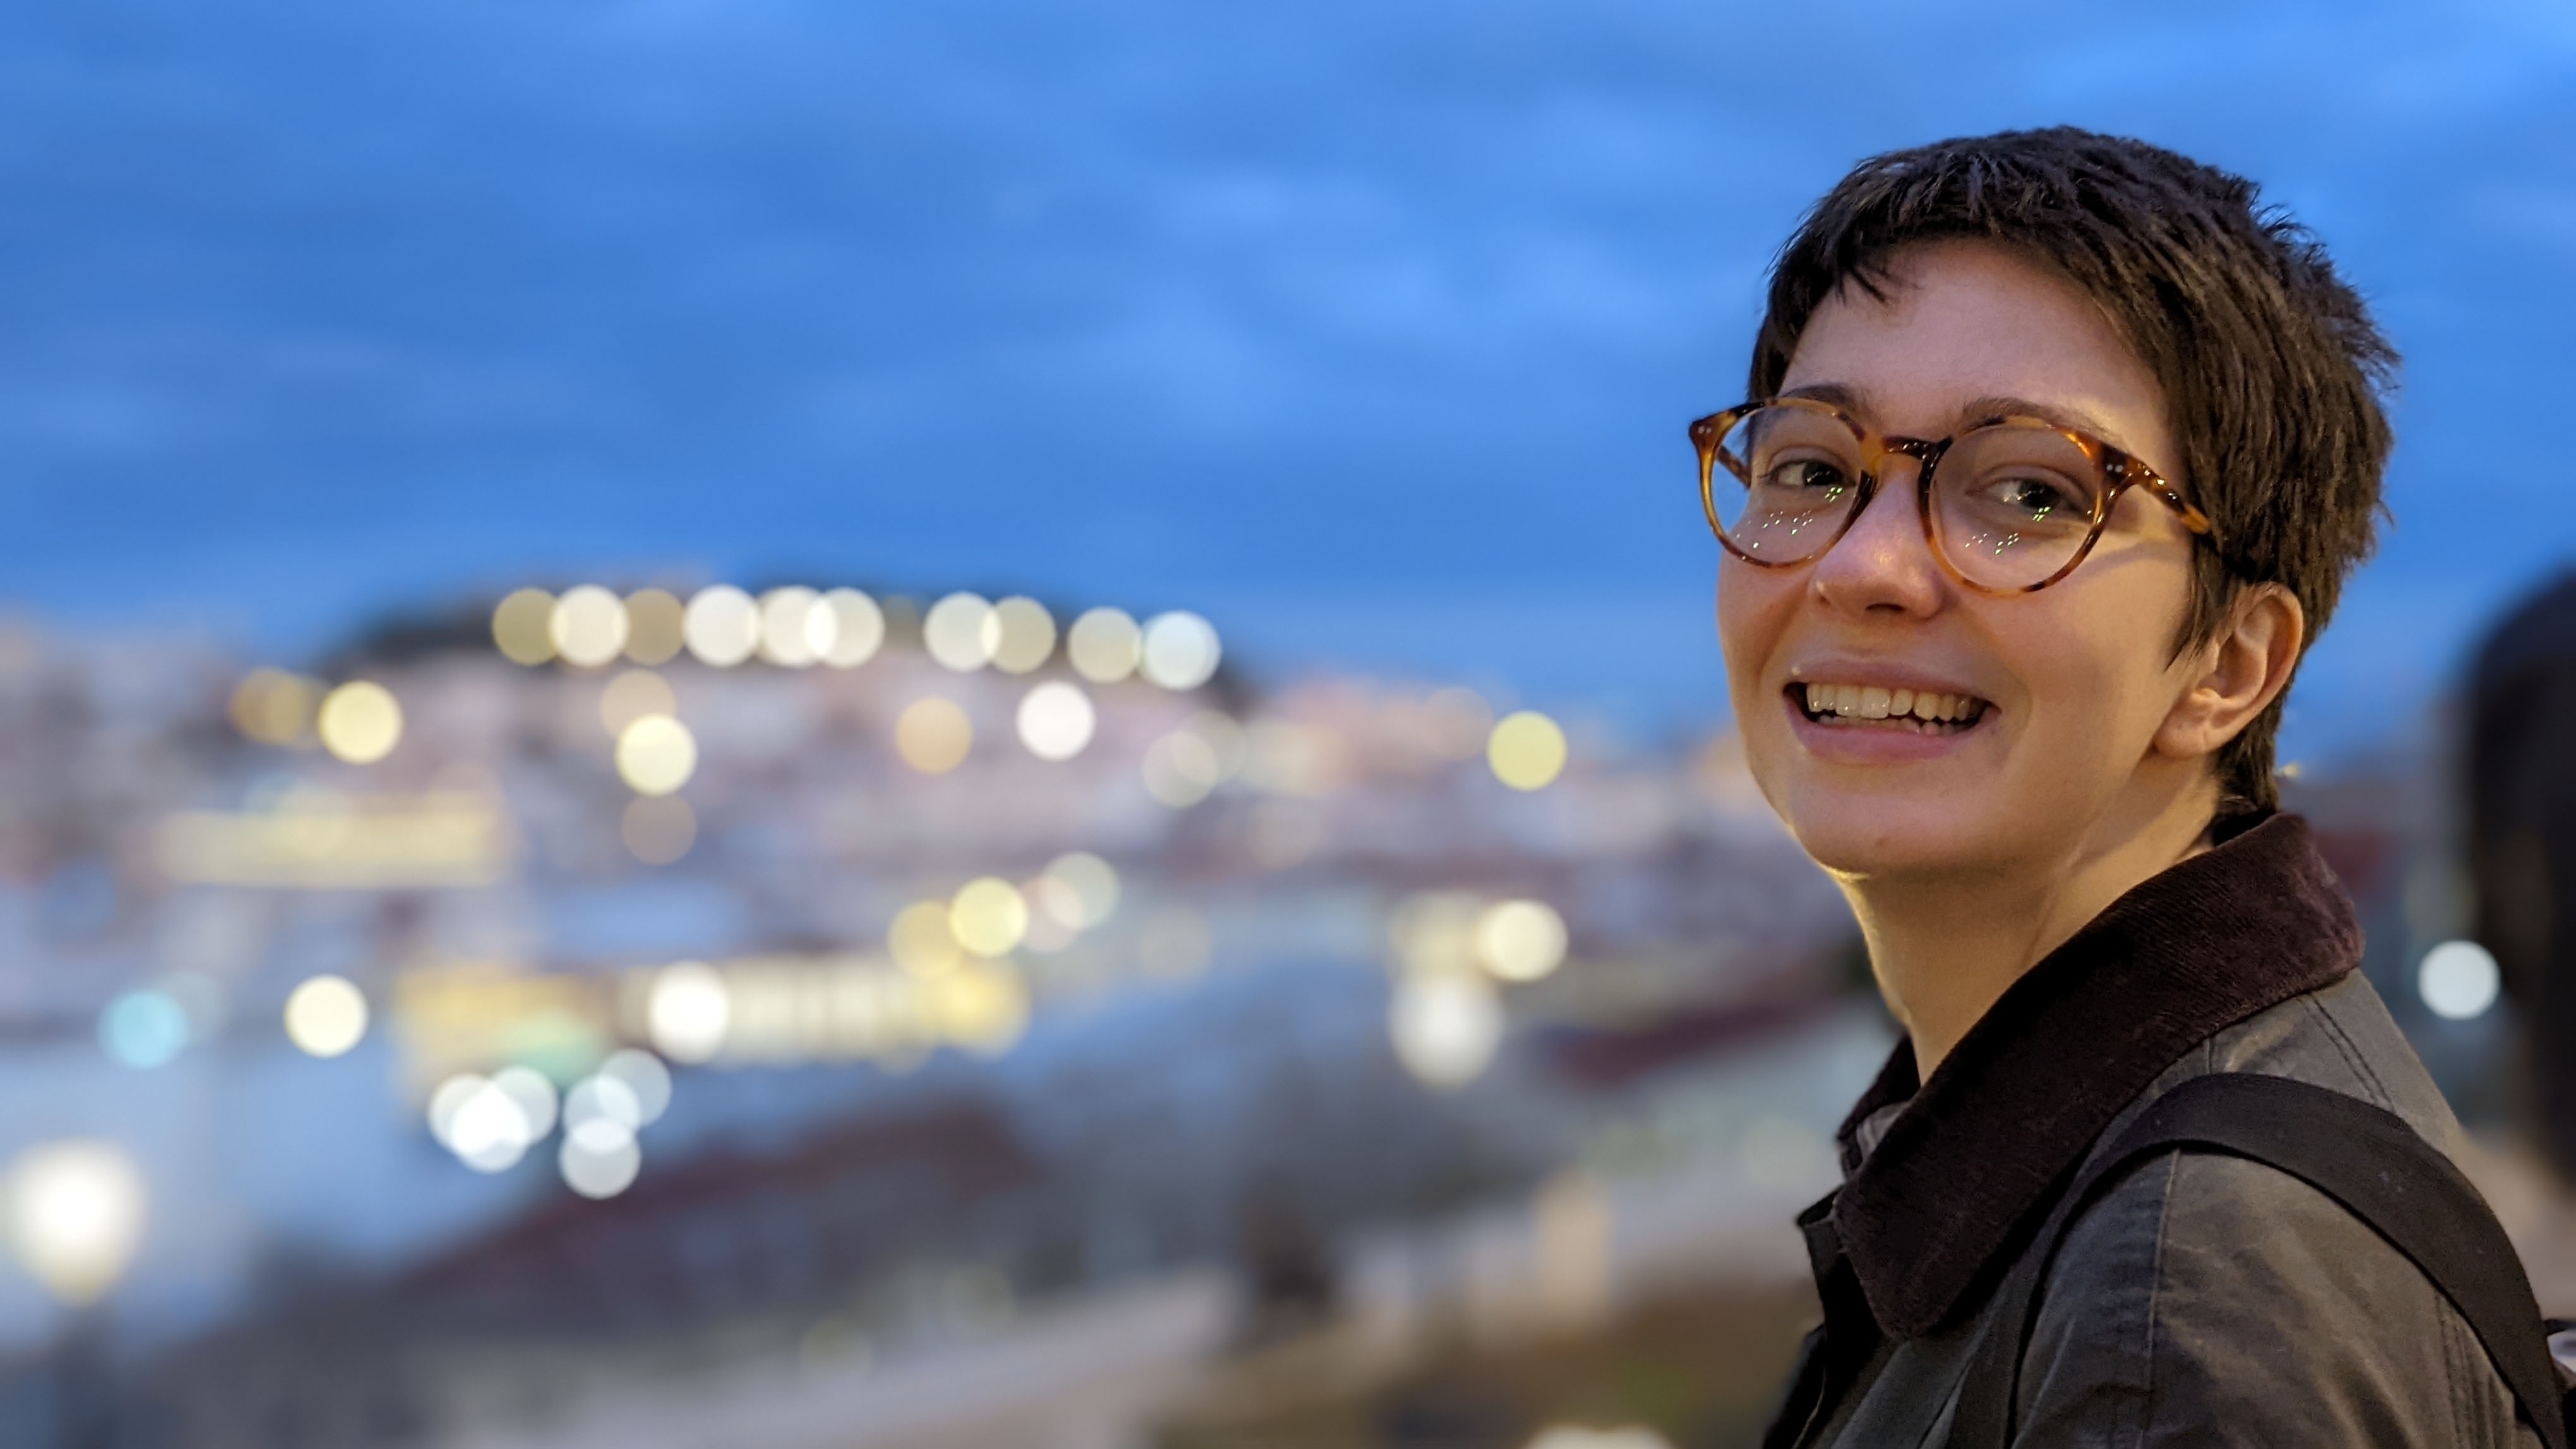 Smiling female student with shortly cropped brown hair with large round tortoise-shell glasses, against background of muted cityscape full of lights